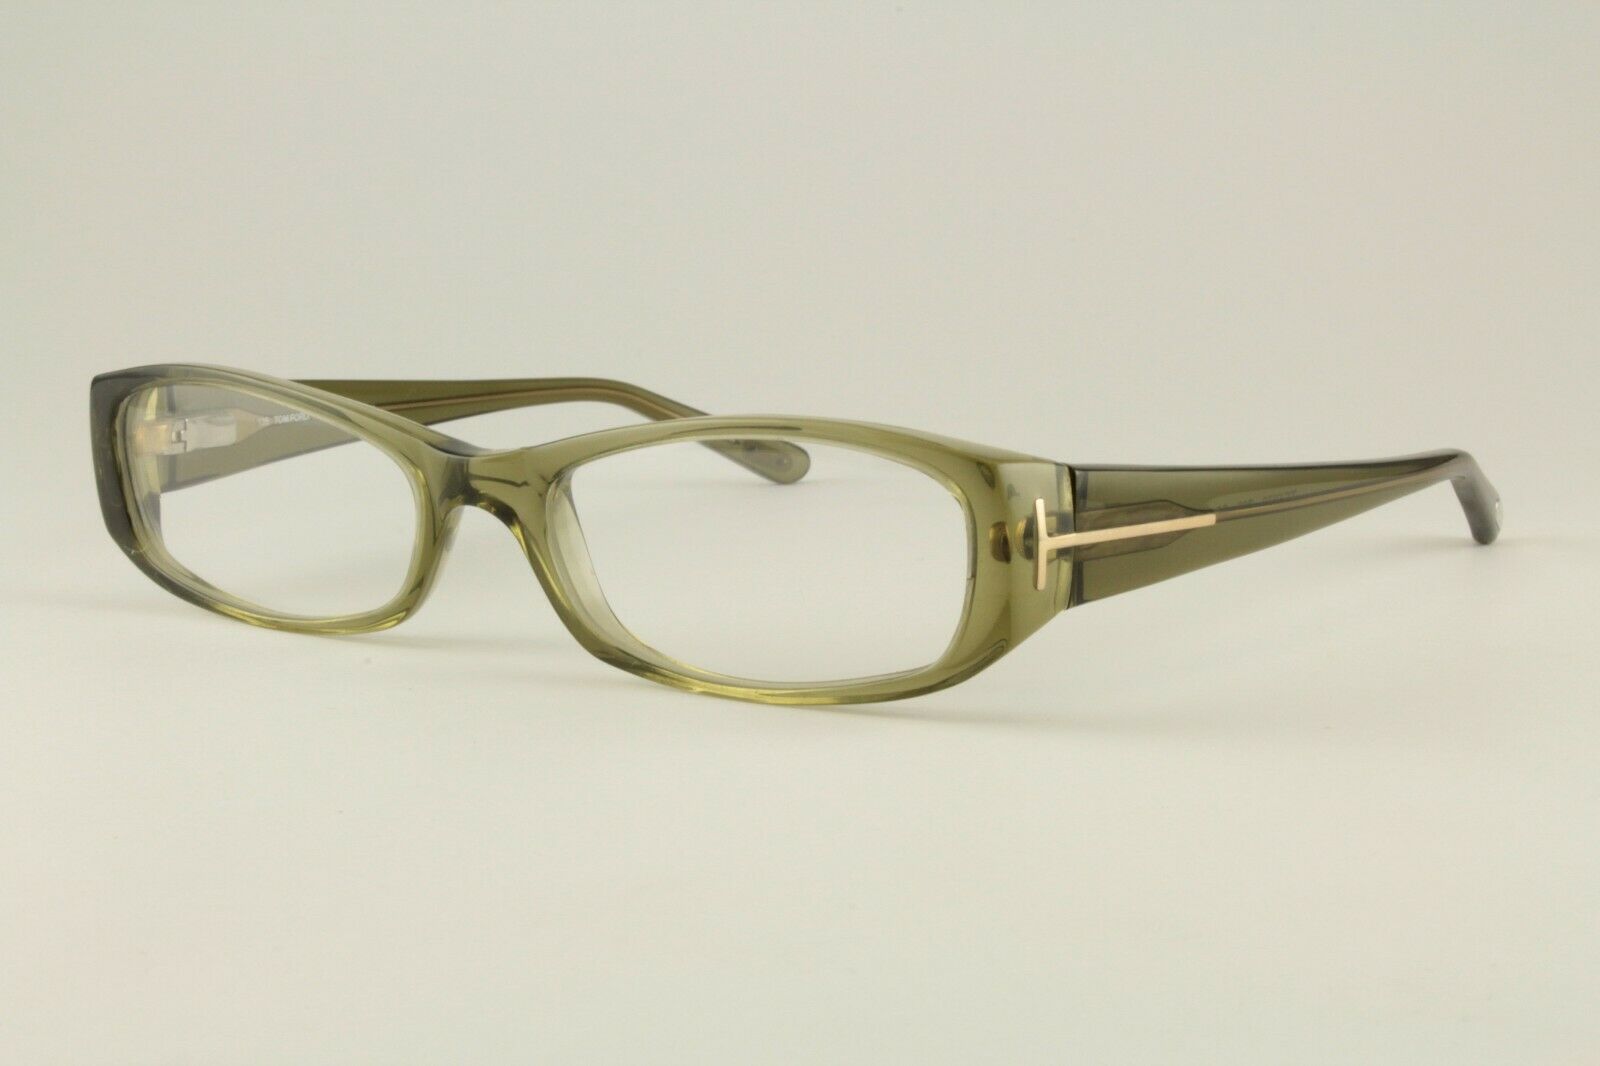  clear/transparent olive green